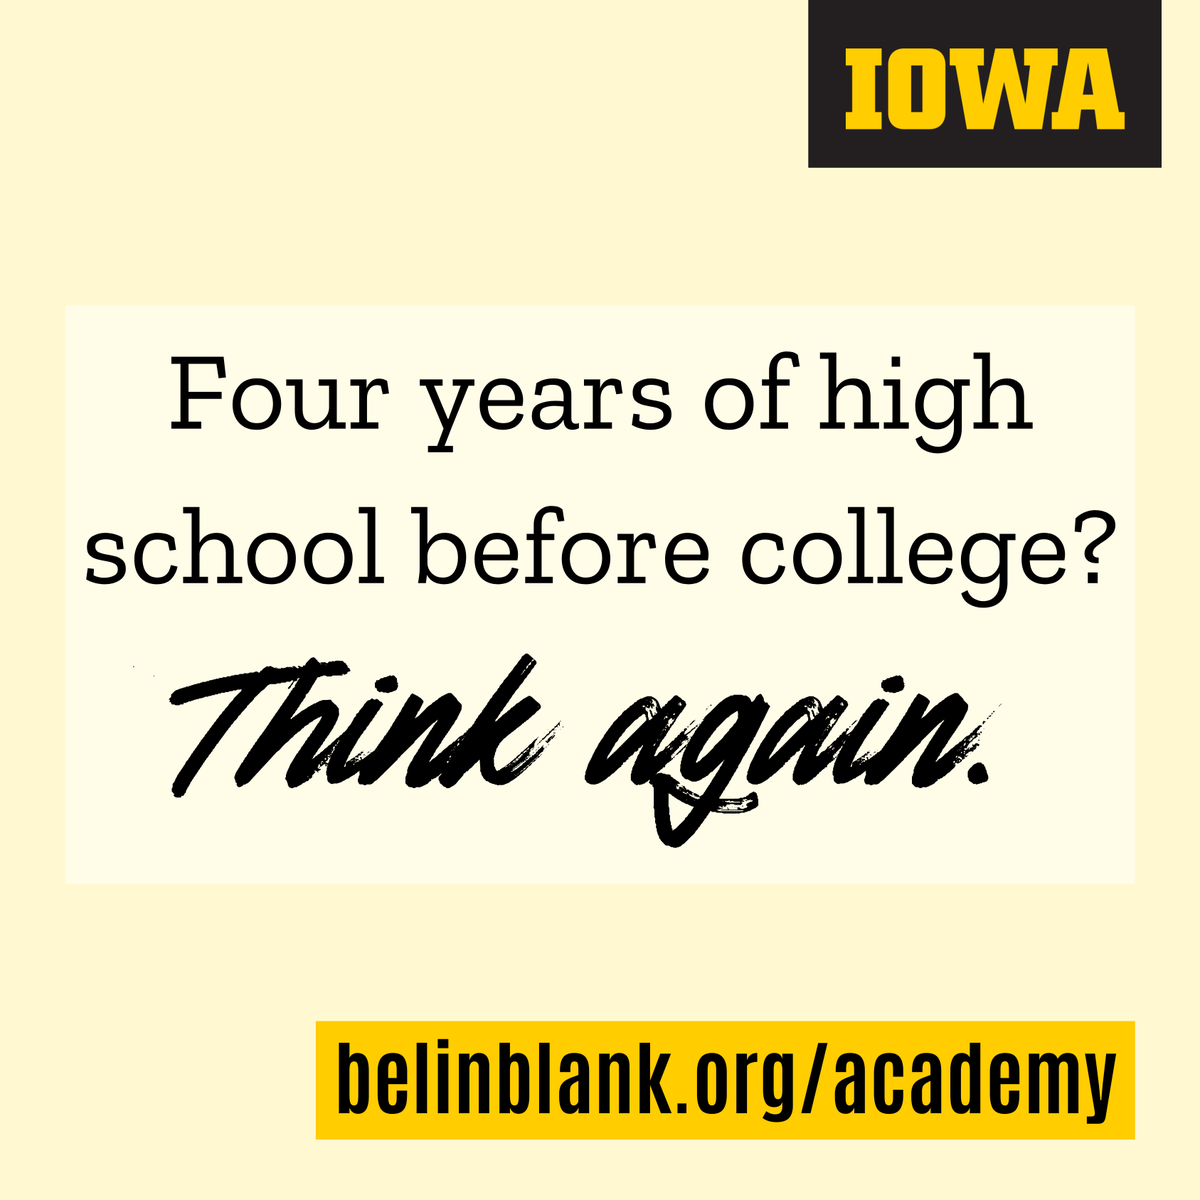 At the Belin-Blank Center, we know that four years of high school isn't for everyone. Visit belinblank.org/academy/ to learn more about our early college entrance program!